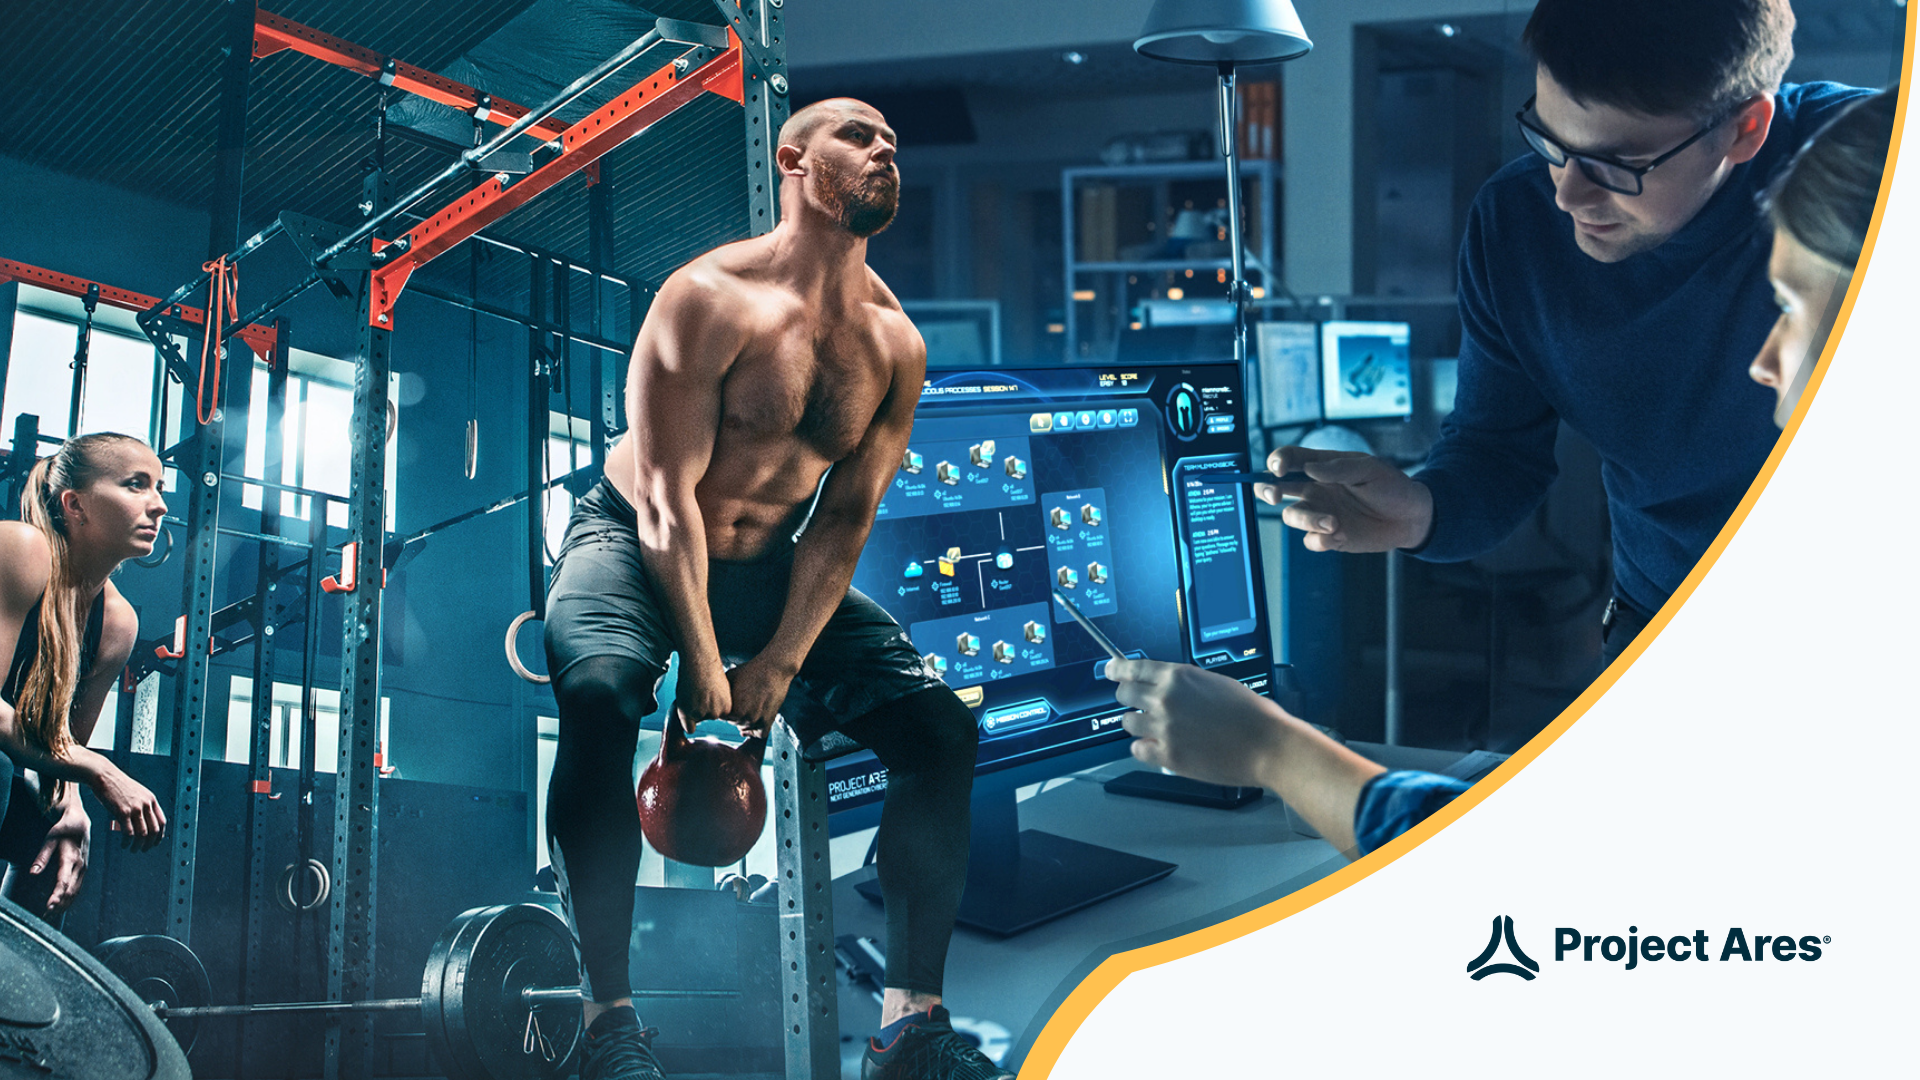 The ultimate Trainer's guide to the Project Ares cyber gym